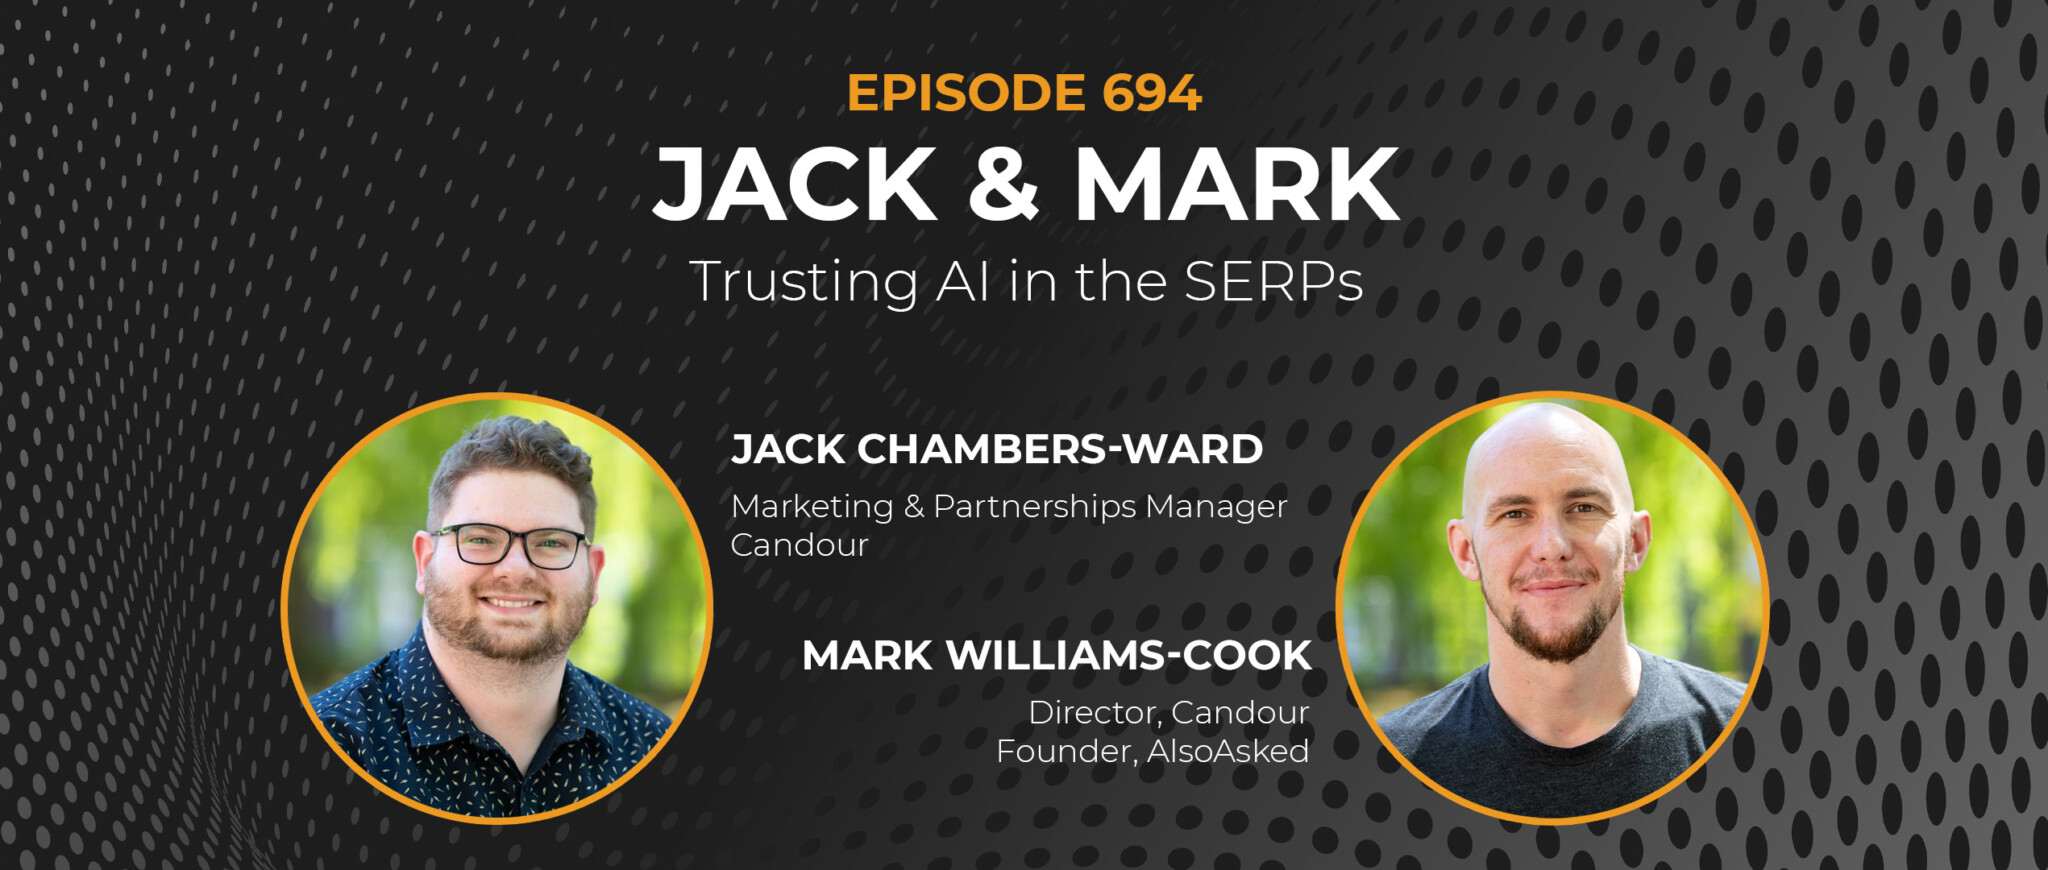 Episode 694: Trusting AI in the SERPs with Mark Williams-Cook and Jack Chambers-Ward